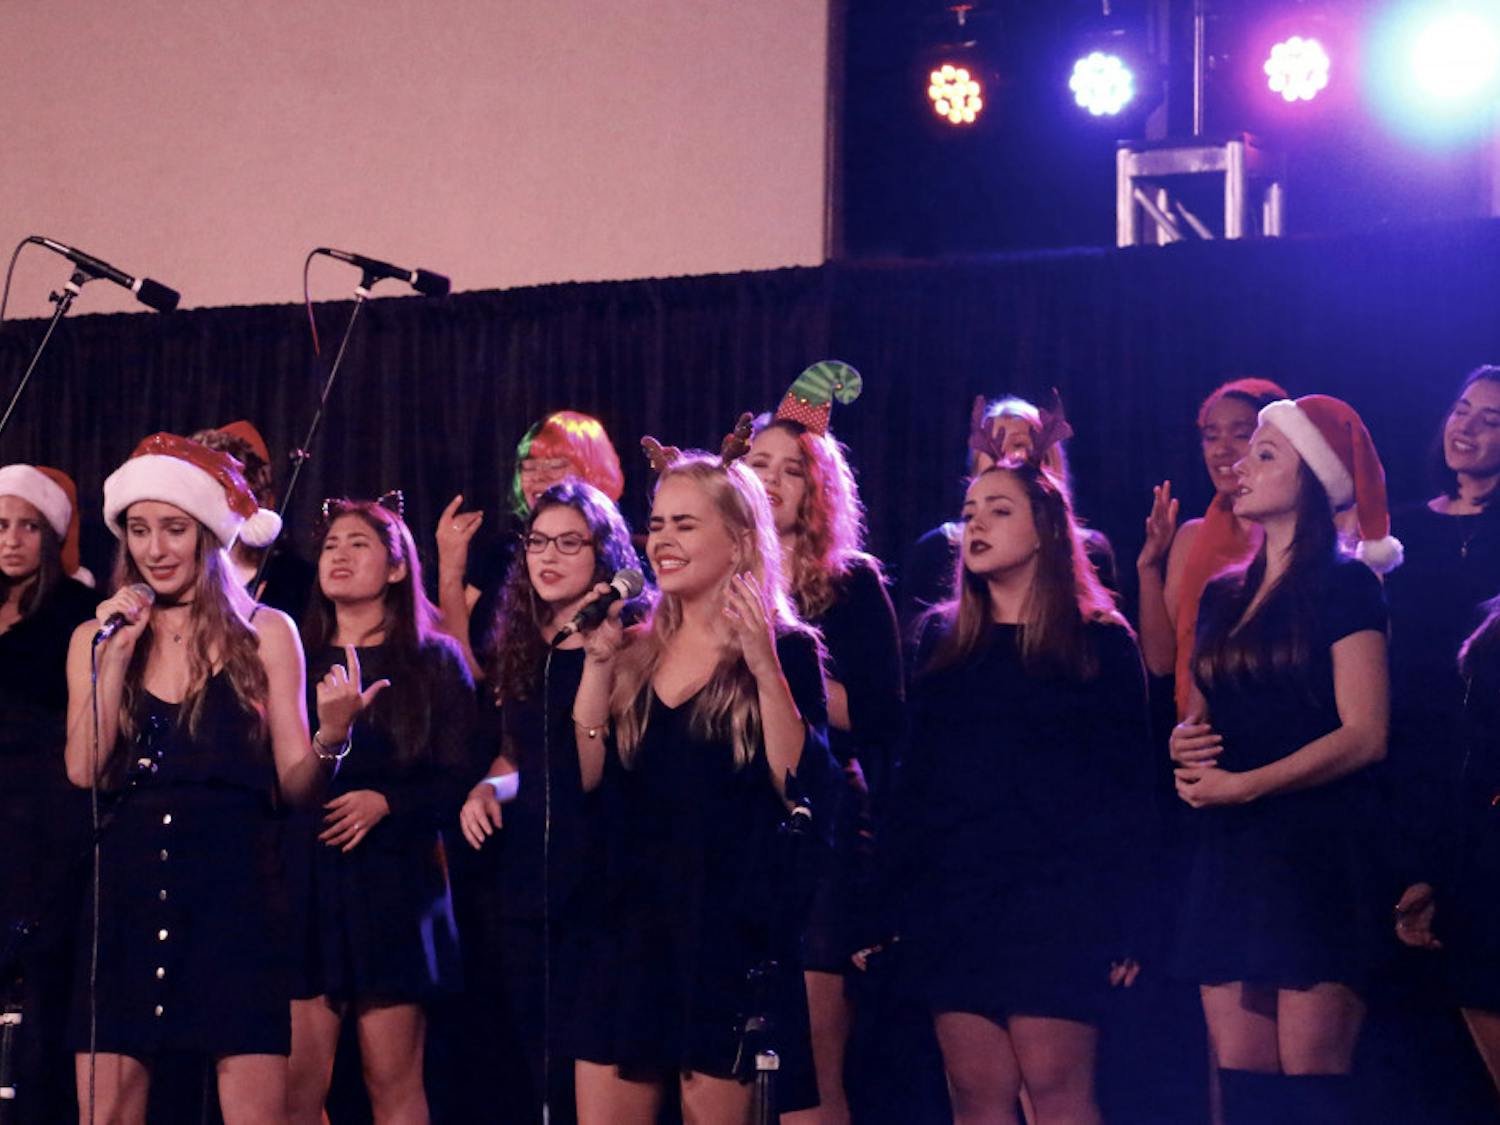 Olivia Serrano, an 18-year-old UF business administration and psychology freshman, leads the a cappella group The Sedoctaves in their performance at the 28th Annual Pond Lighting at North Florida Regional Medical Center.